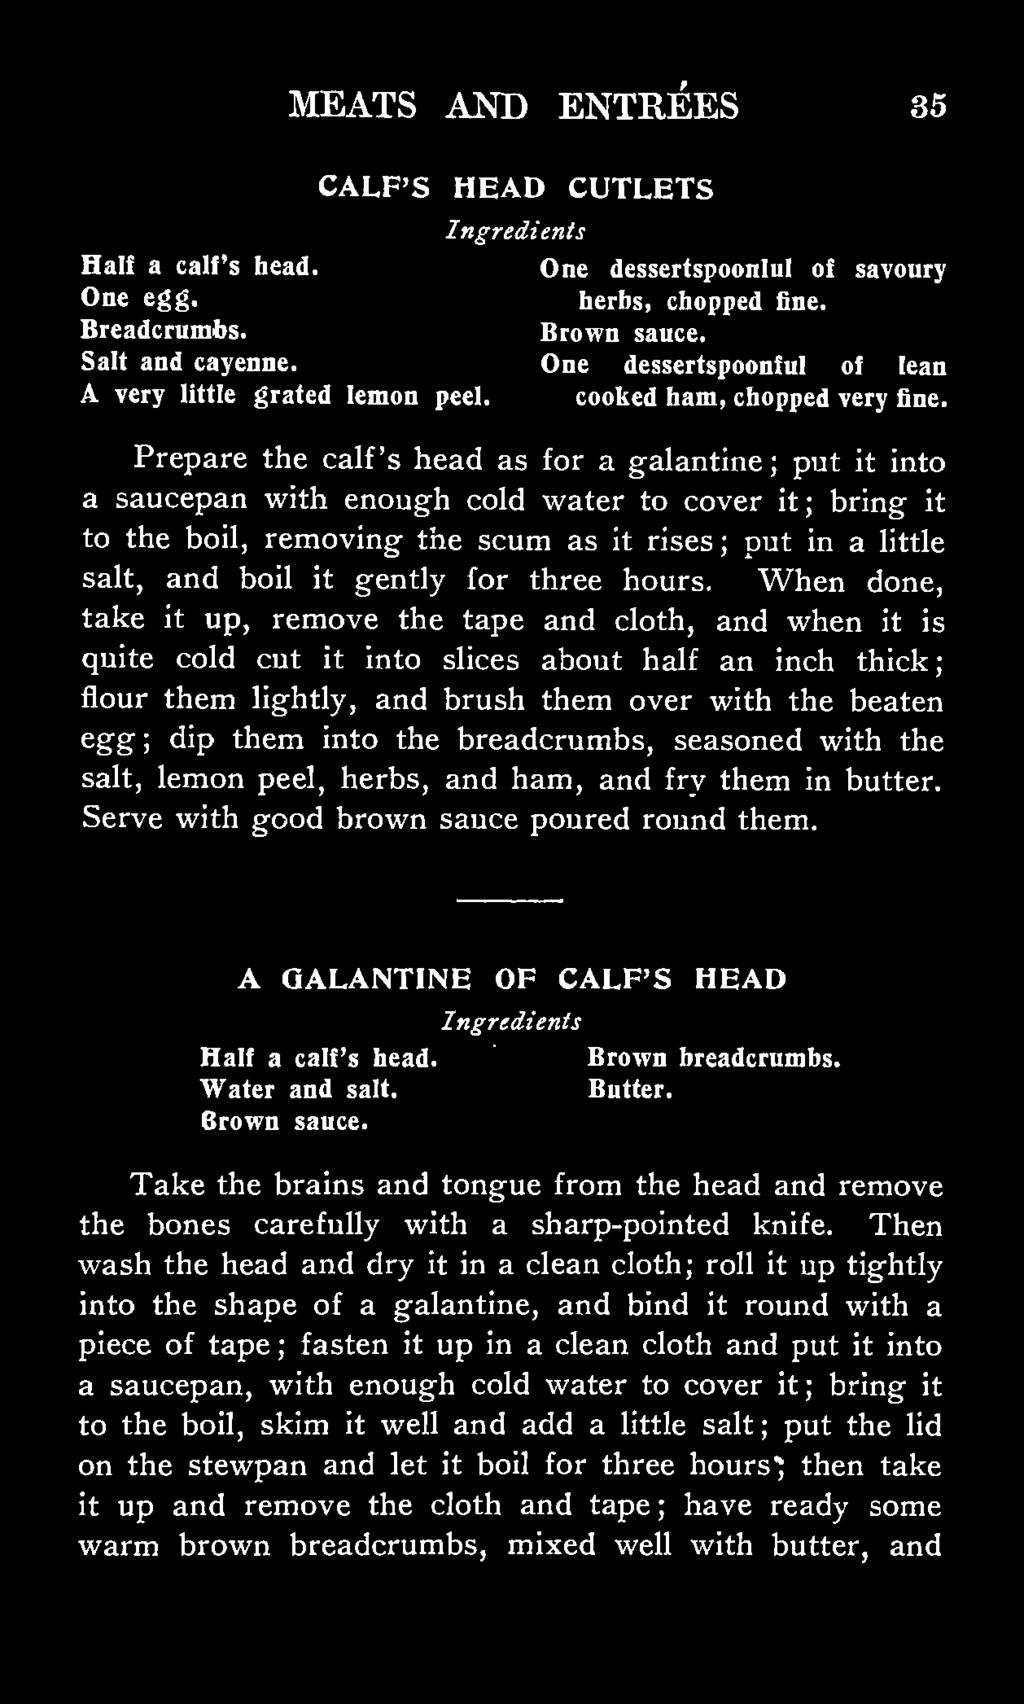 Prepare the calf's head as for a galantine; put it into a saucepan with enough cold water to cover it; bring it to the boil, removing the scum as it rises; put in a little salt, and boil it gently